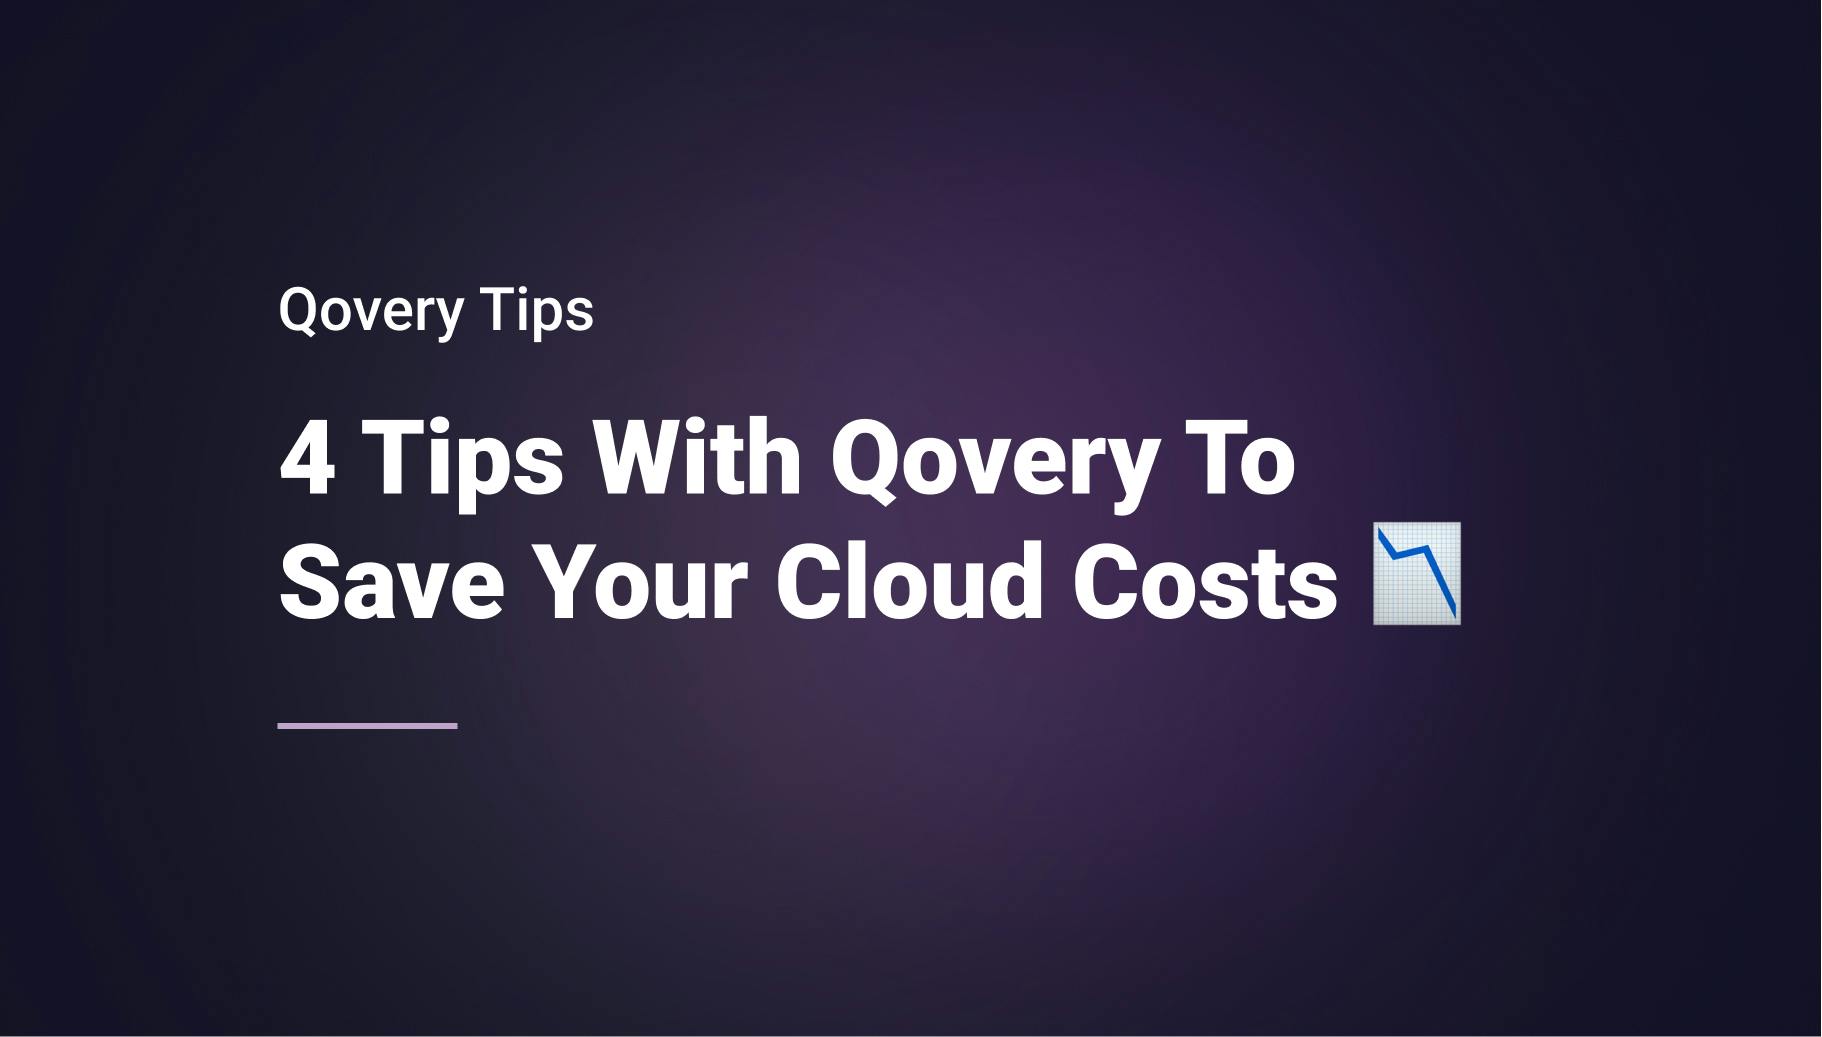 4 Tips With Qovery To Reduce Your Cloud Costs - Qovery